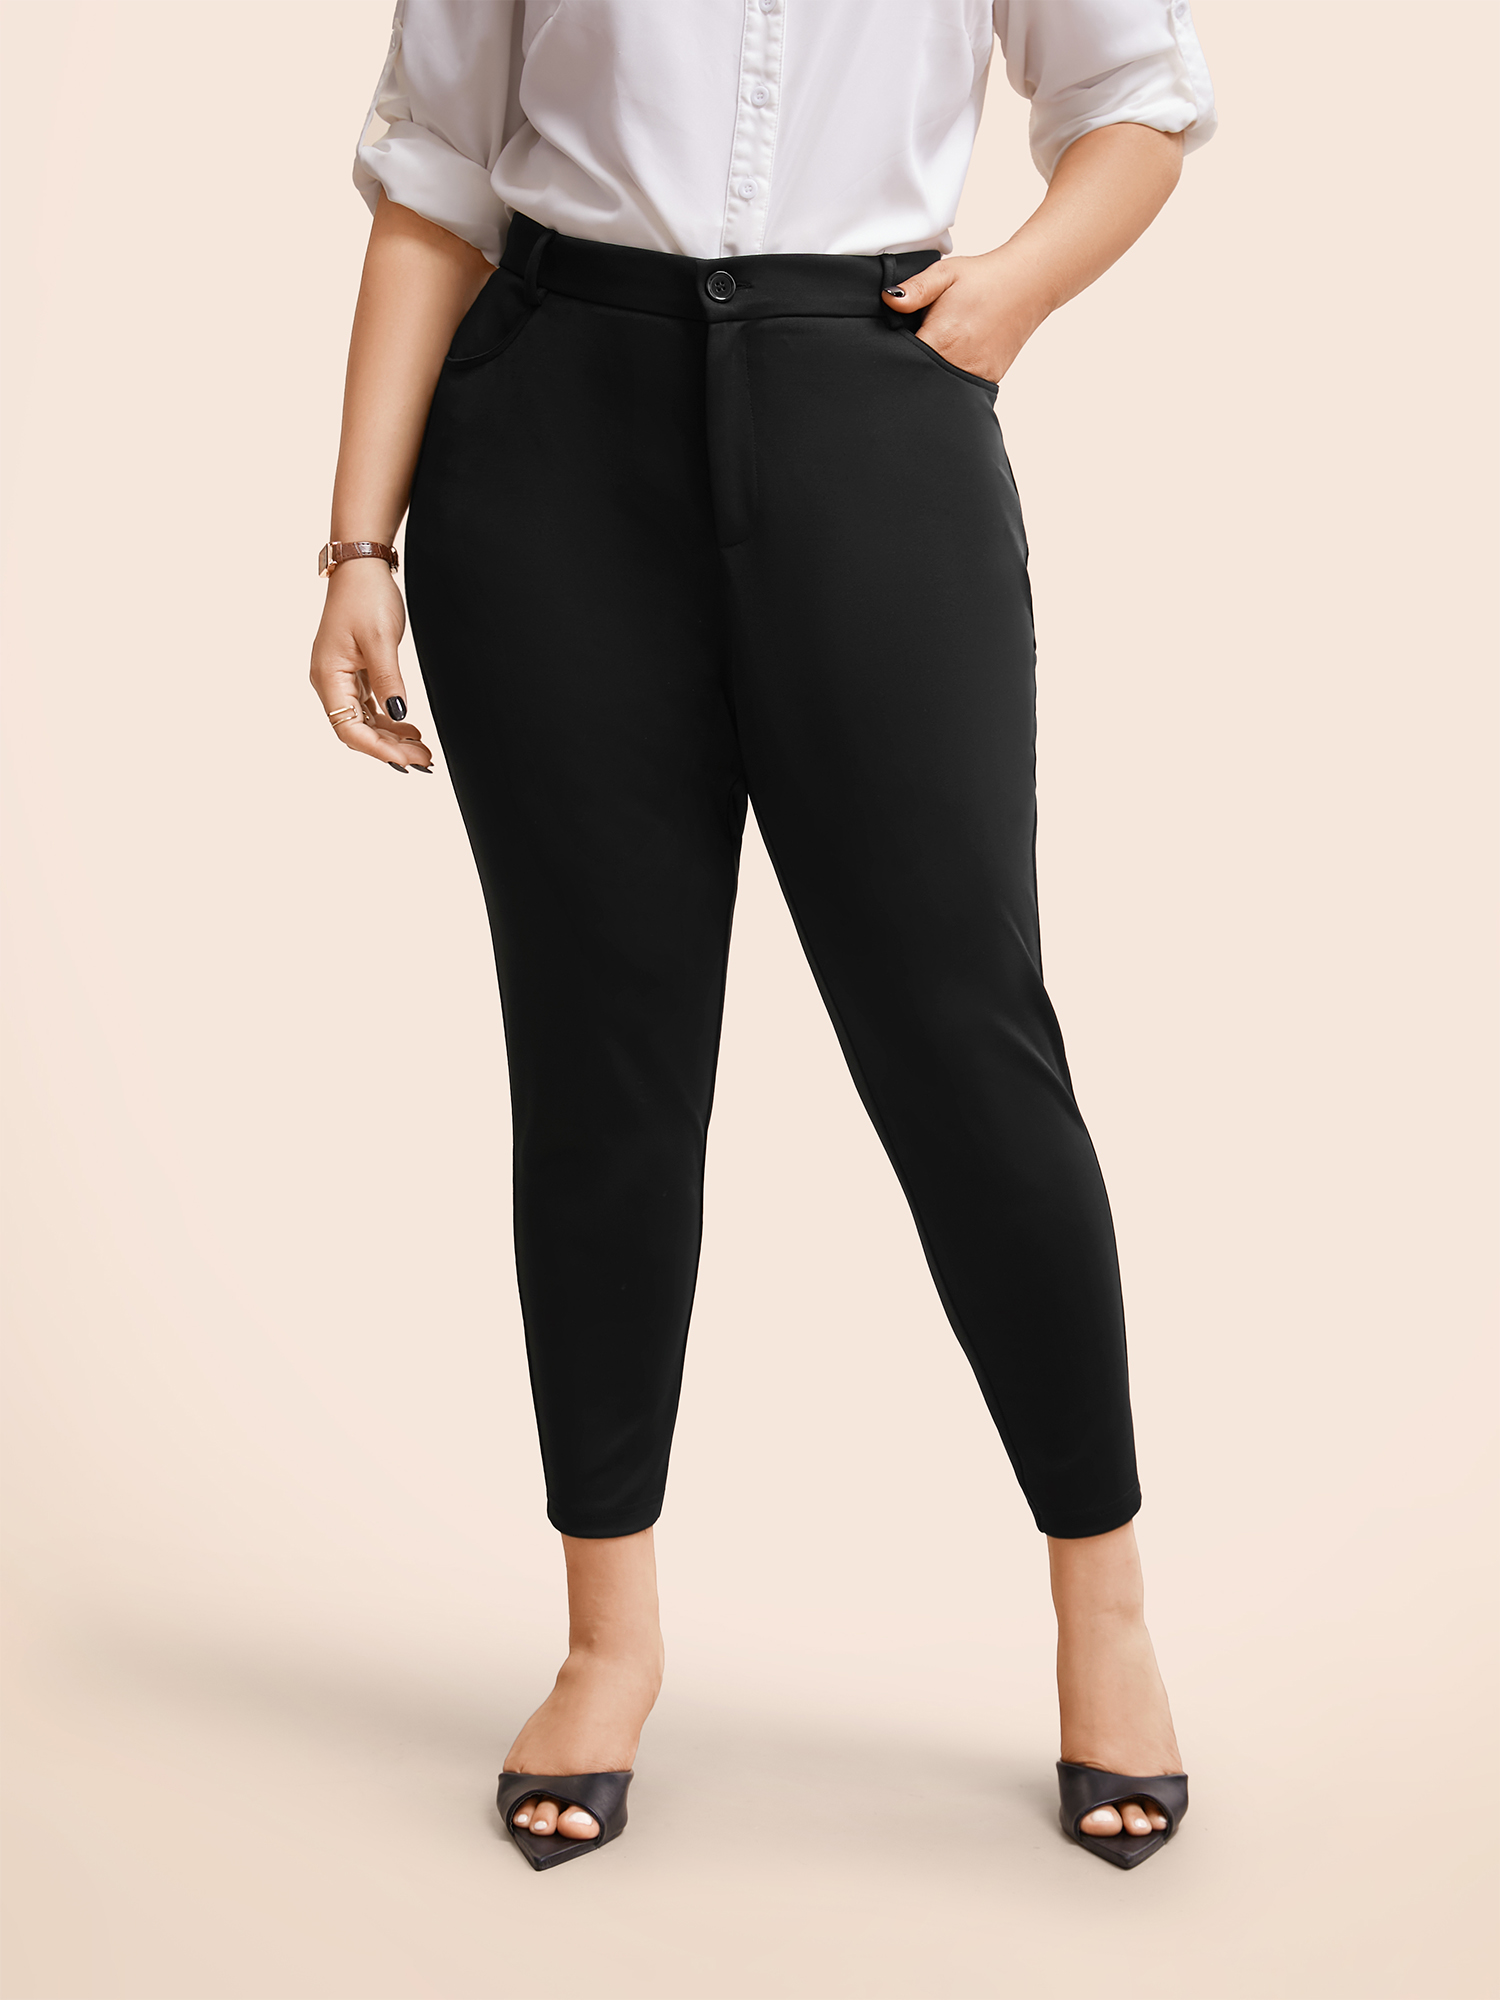 

Plus Size Stretchy-Fit Pocket Elastic Waist Pants Women Black At the Office Bodycon High Rise Work Pants BloomChic